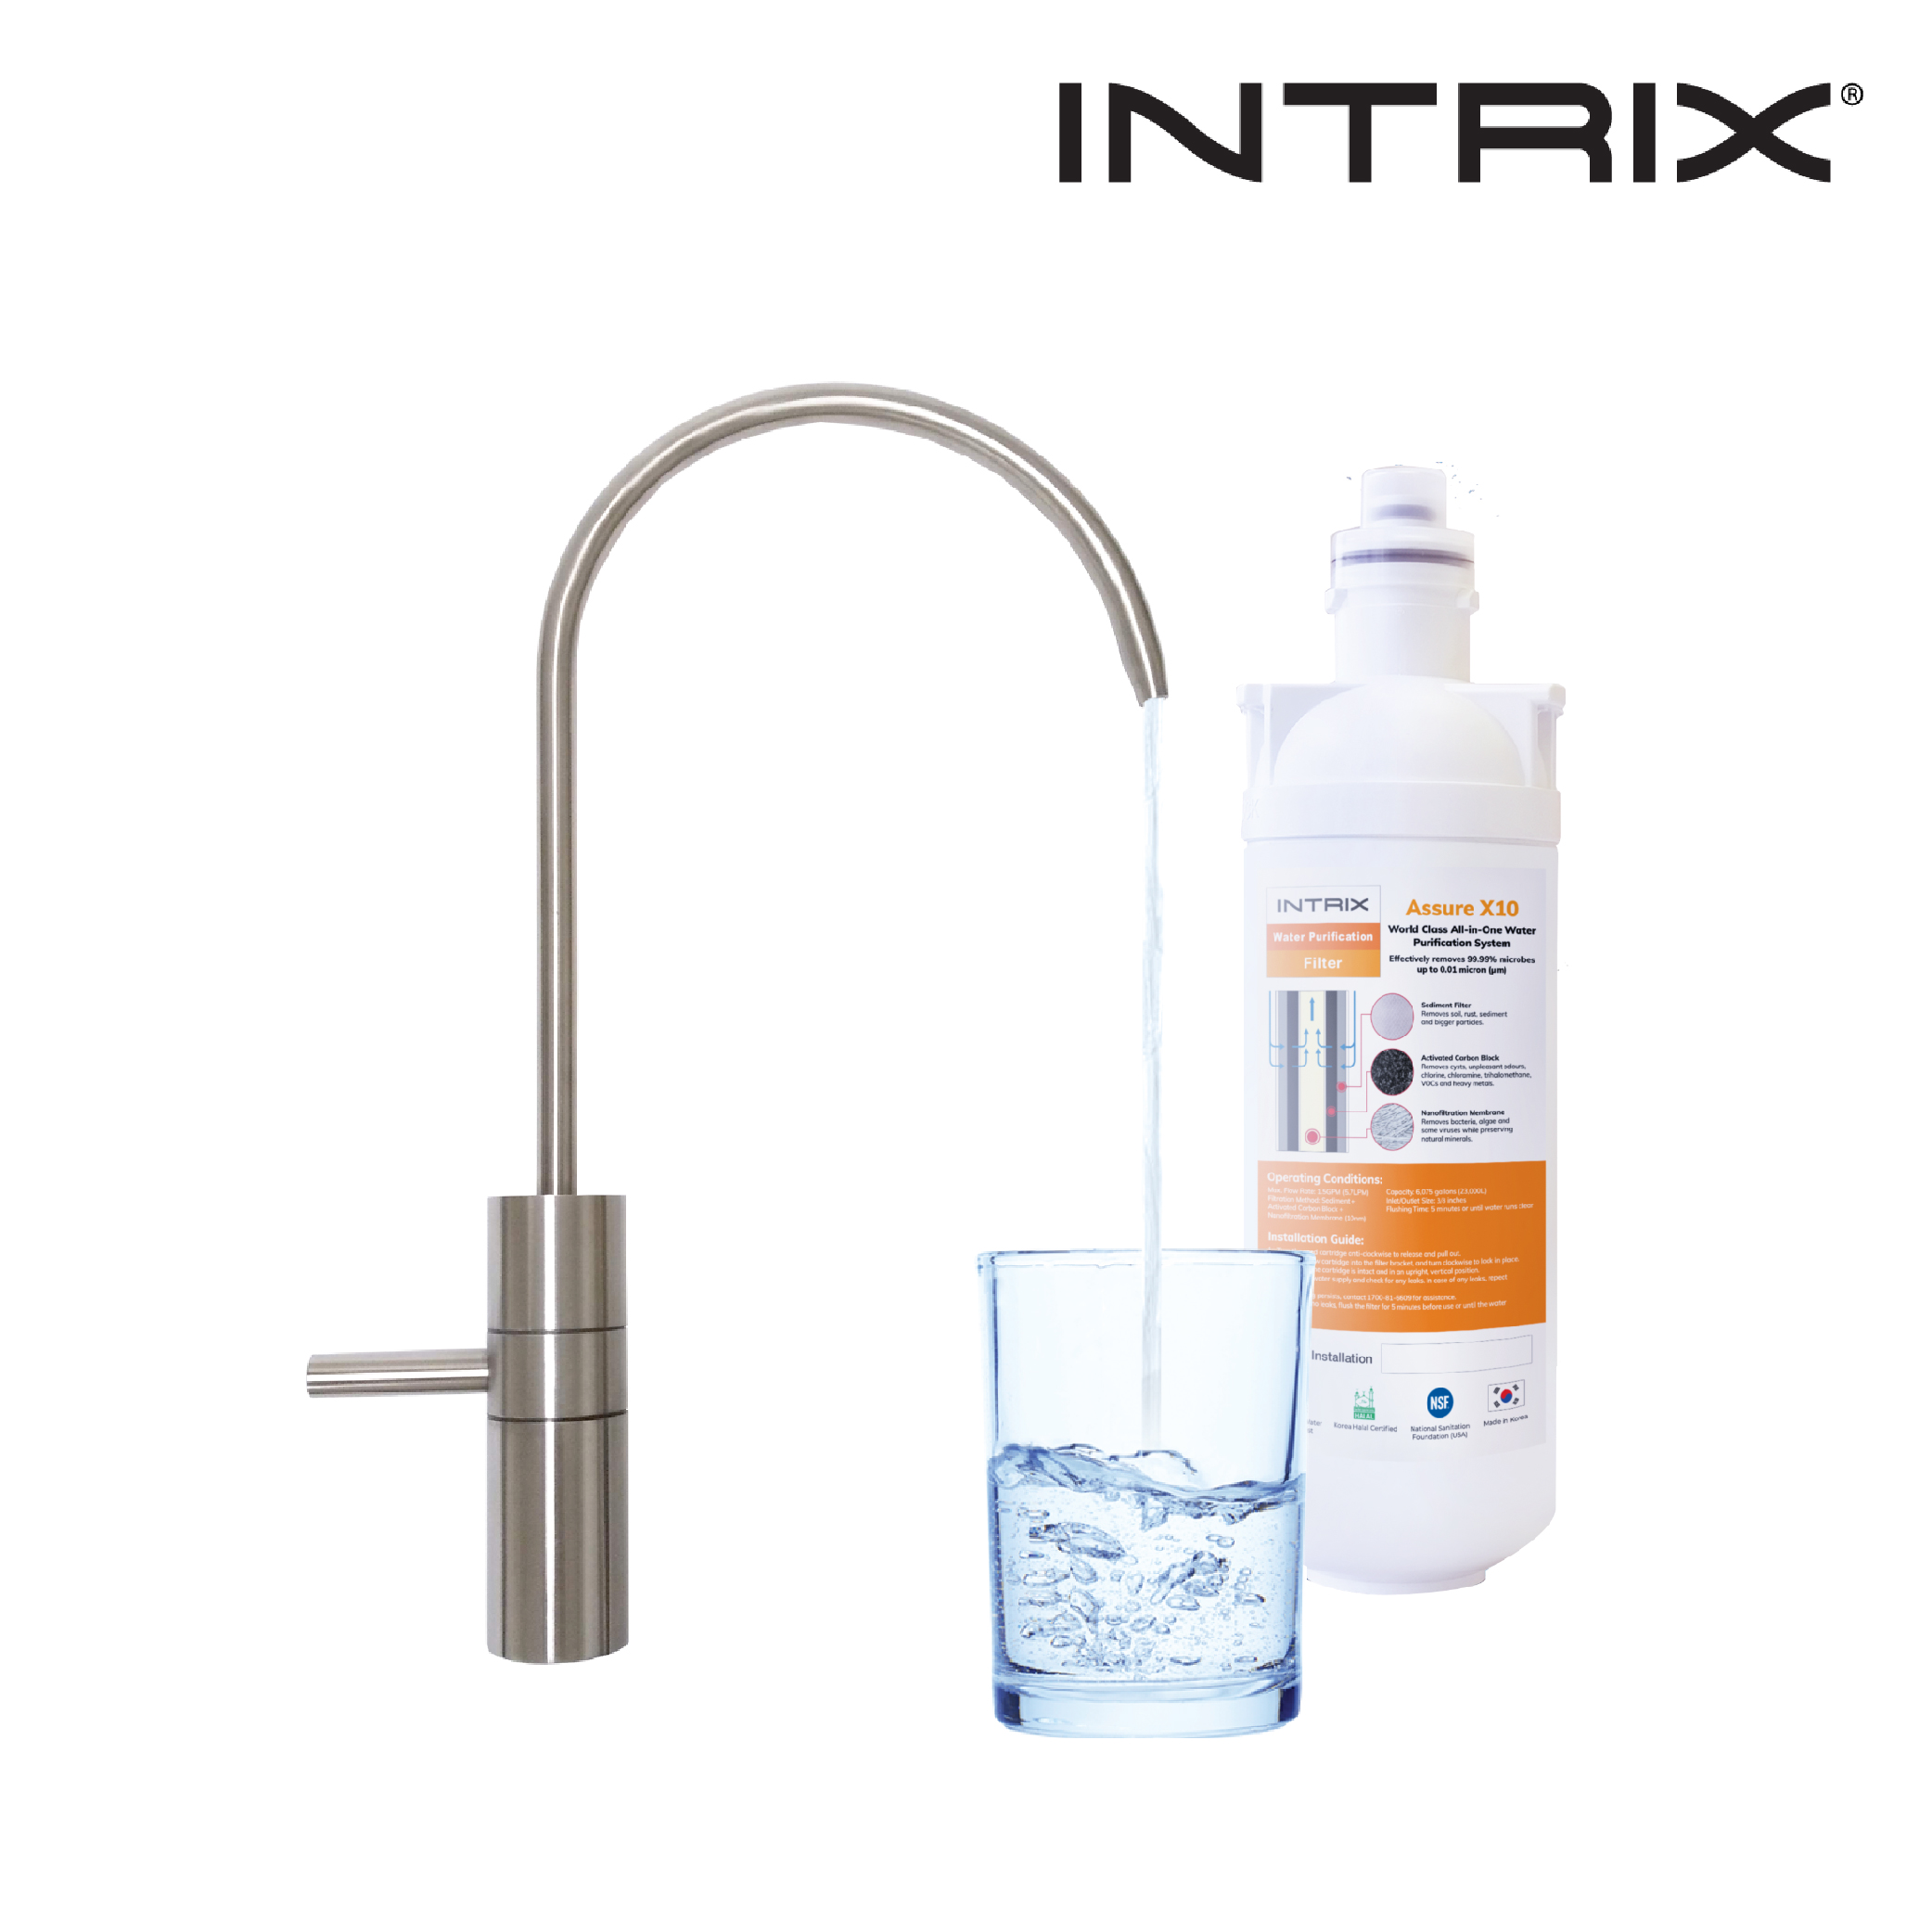 Intrix One Hotel Tap Water Filtered Faucet